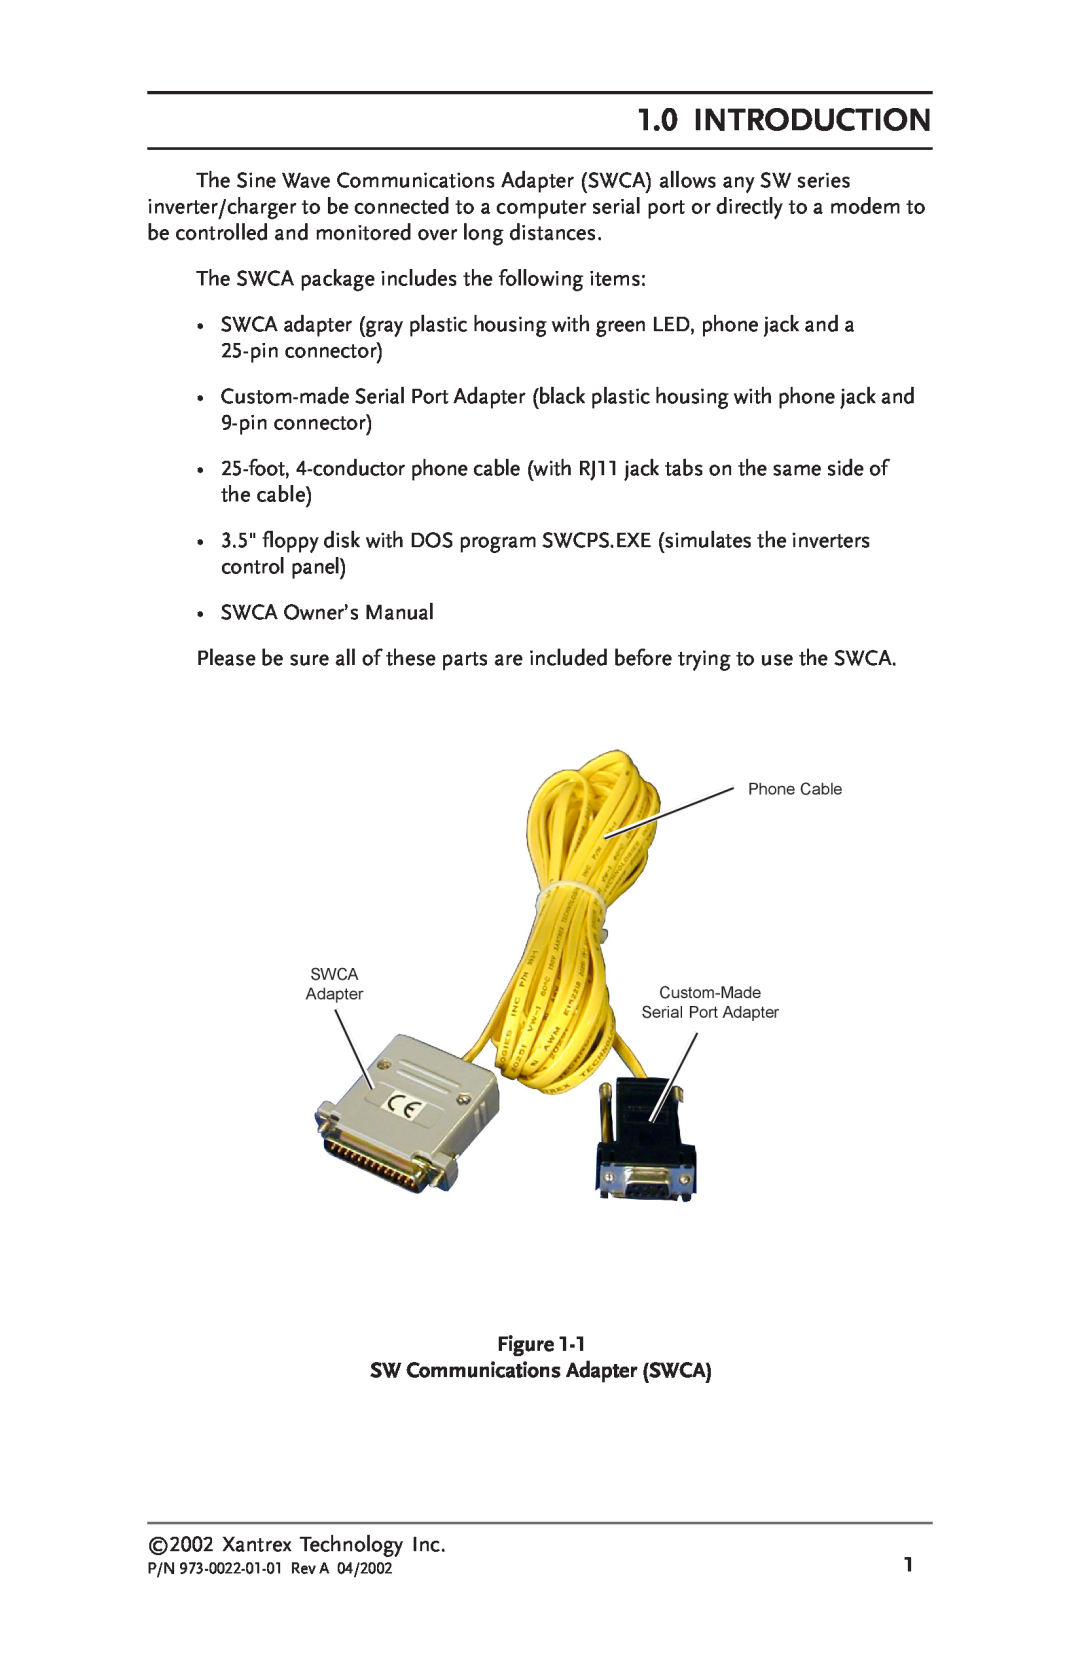 Xantrex Technology owner manual Introduction, SW Communications Adapter SWCA 